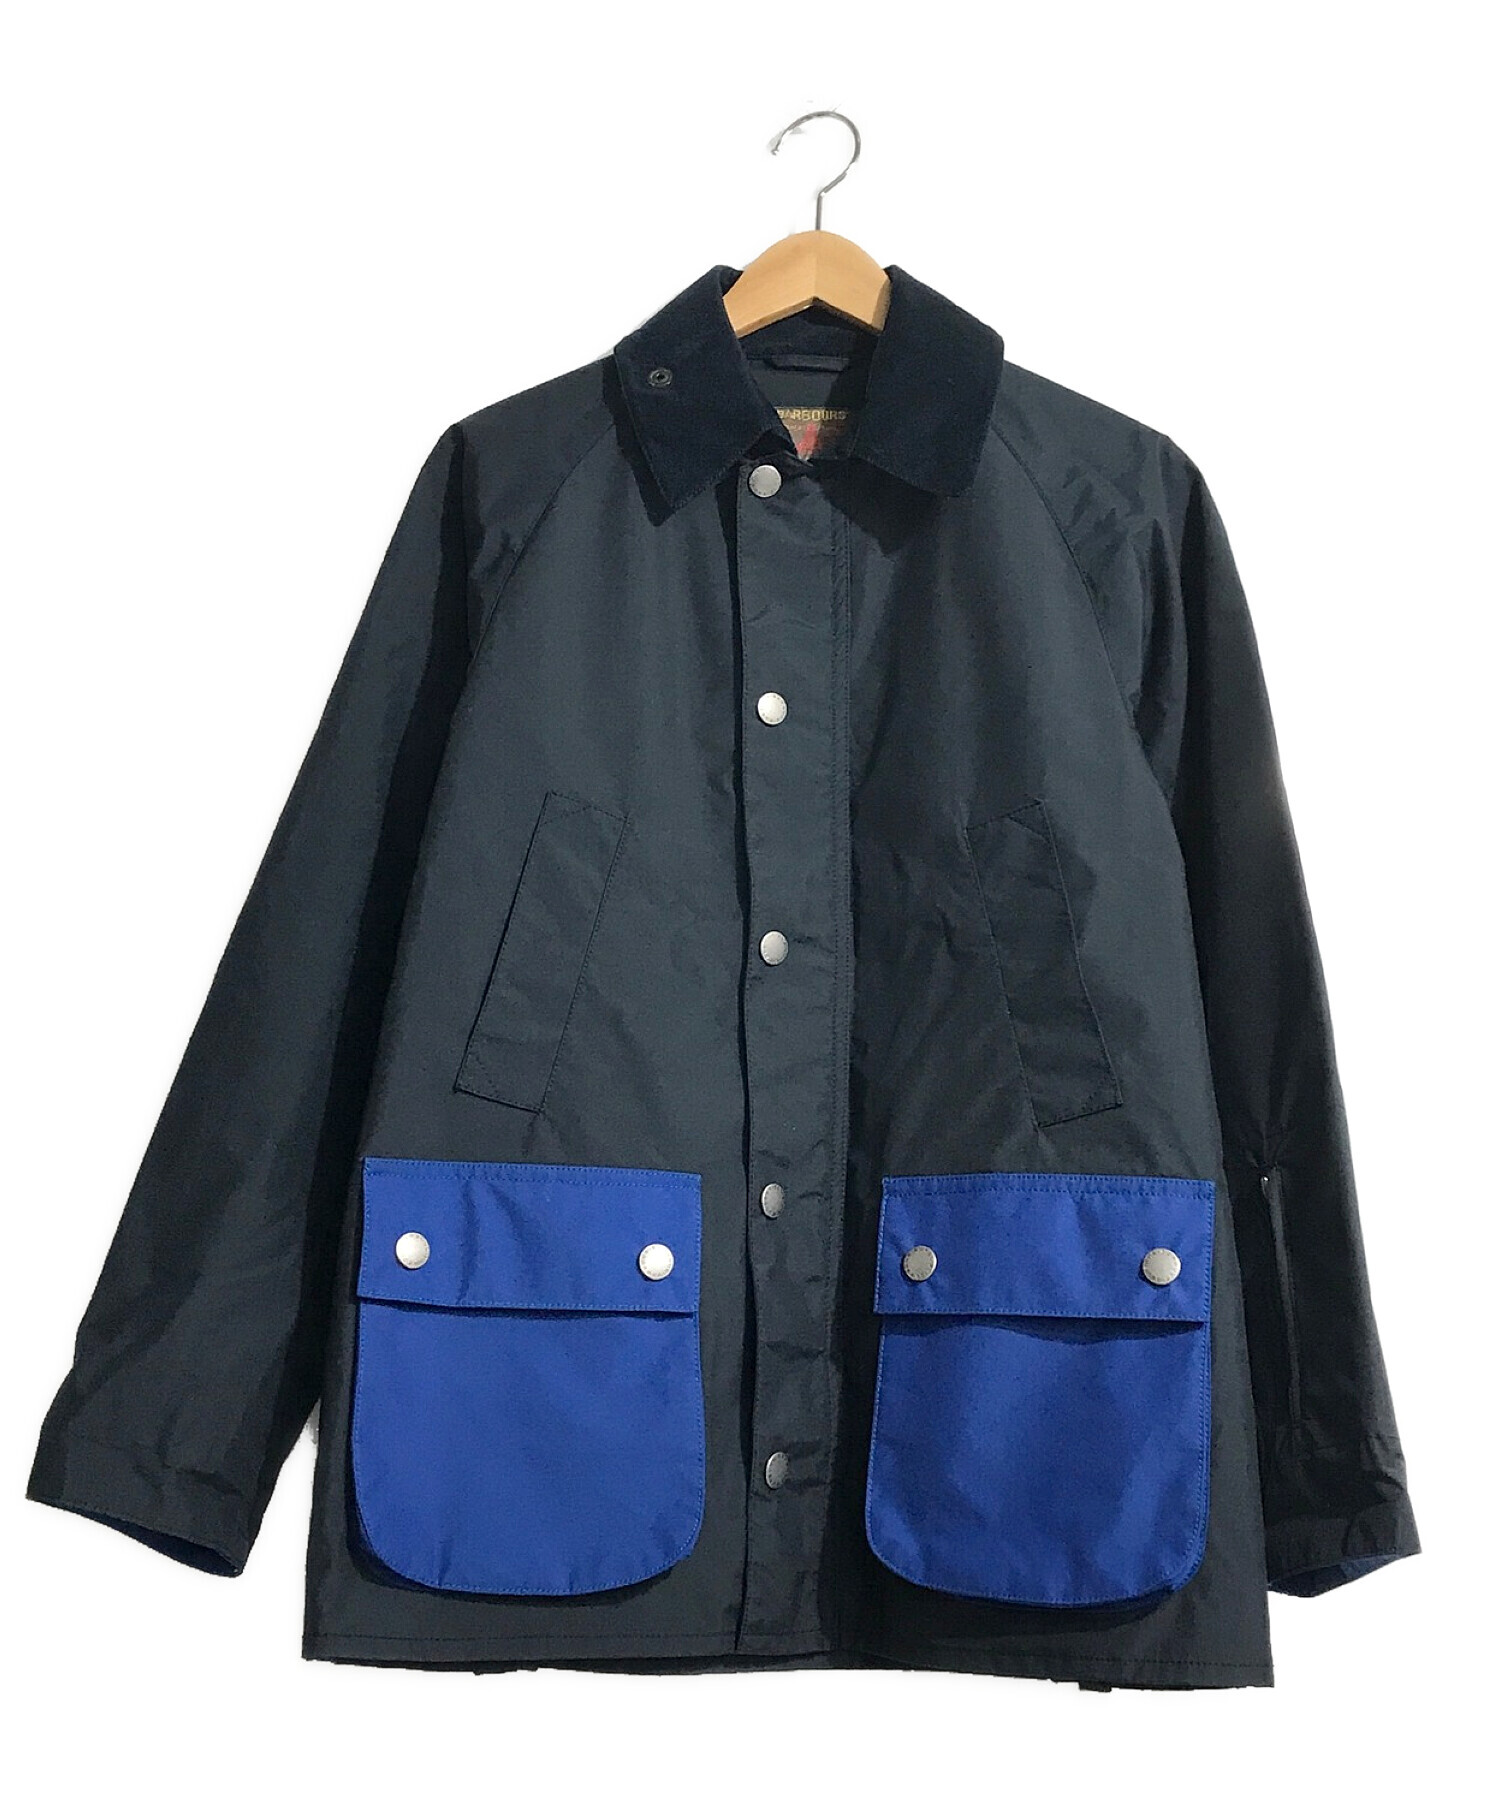 Barbour SOPHNET. BEDALE SL S 受注生産品 - ジャケット・アウター